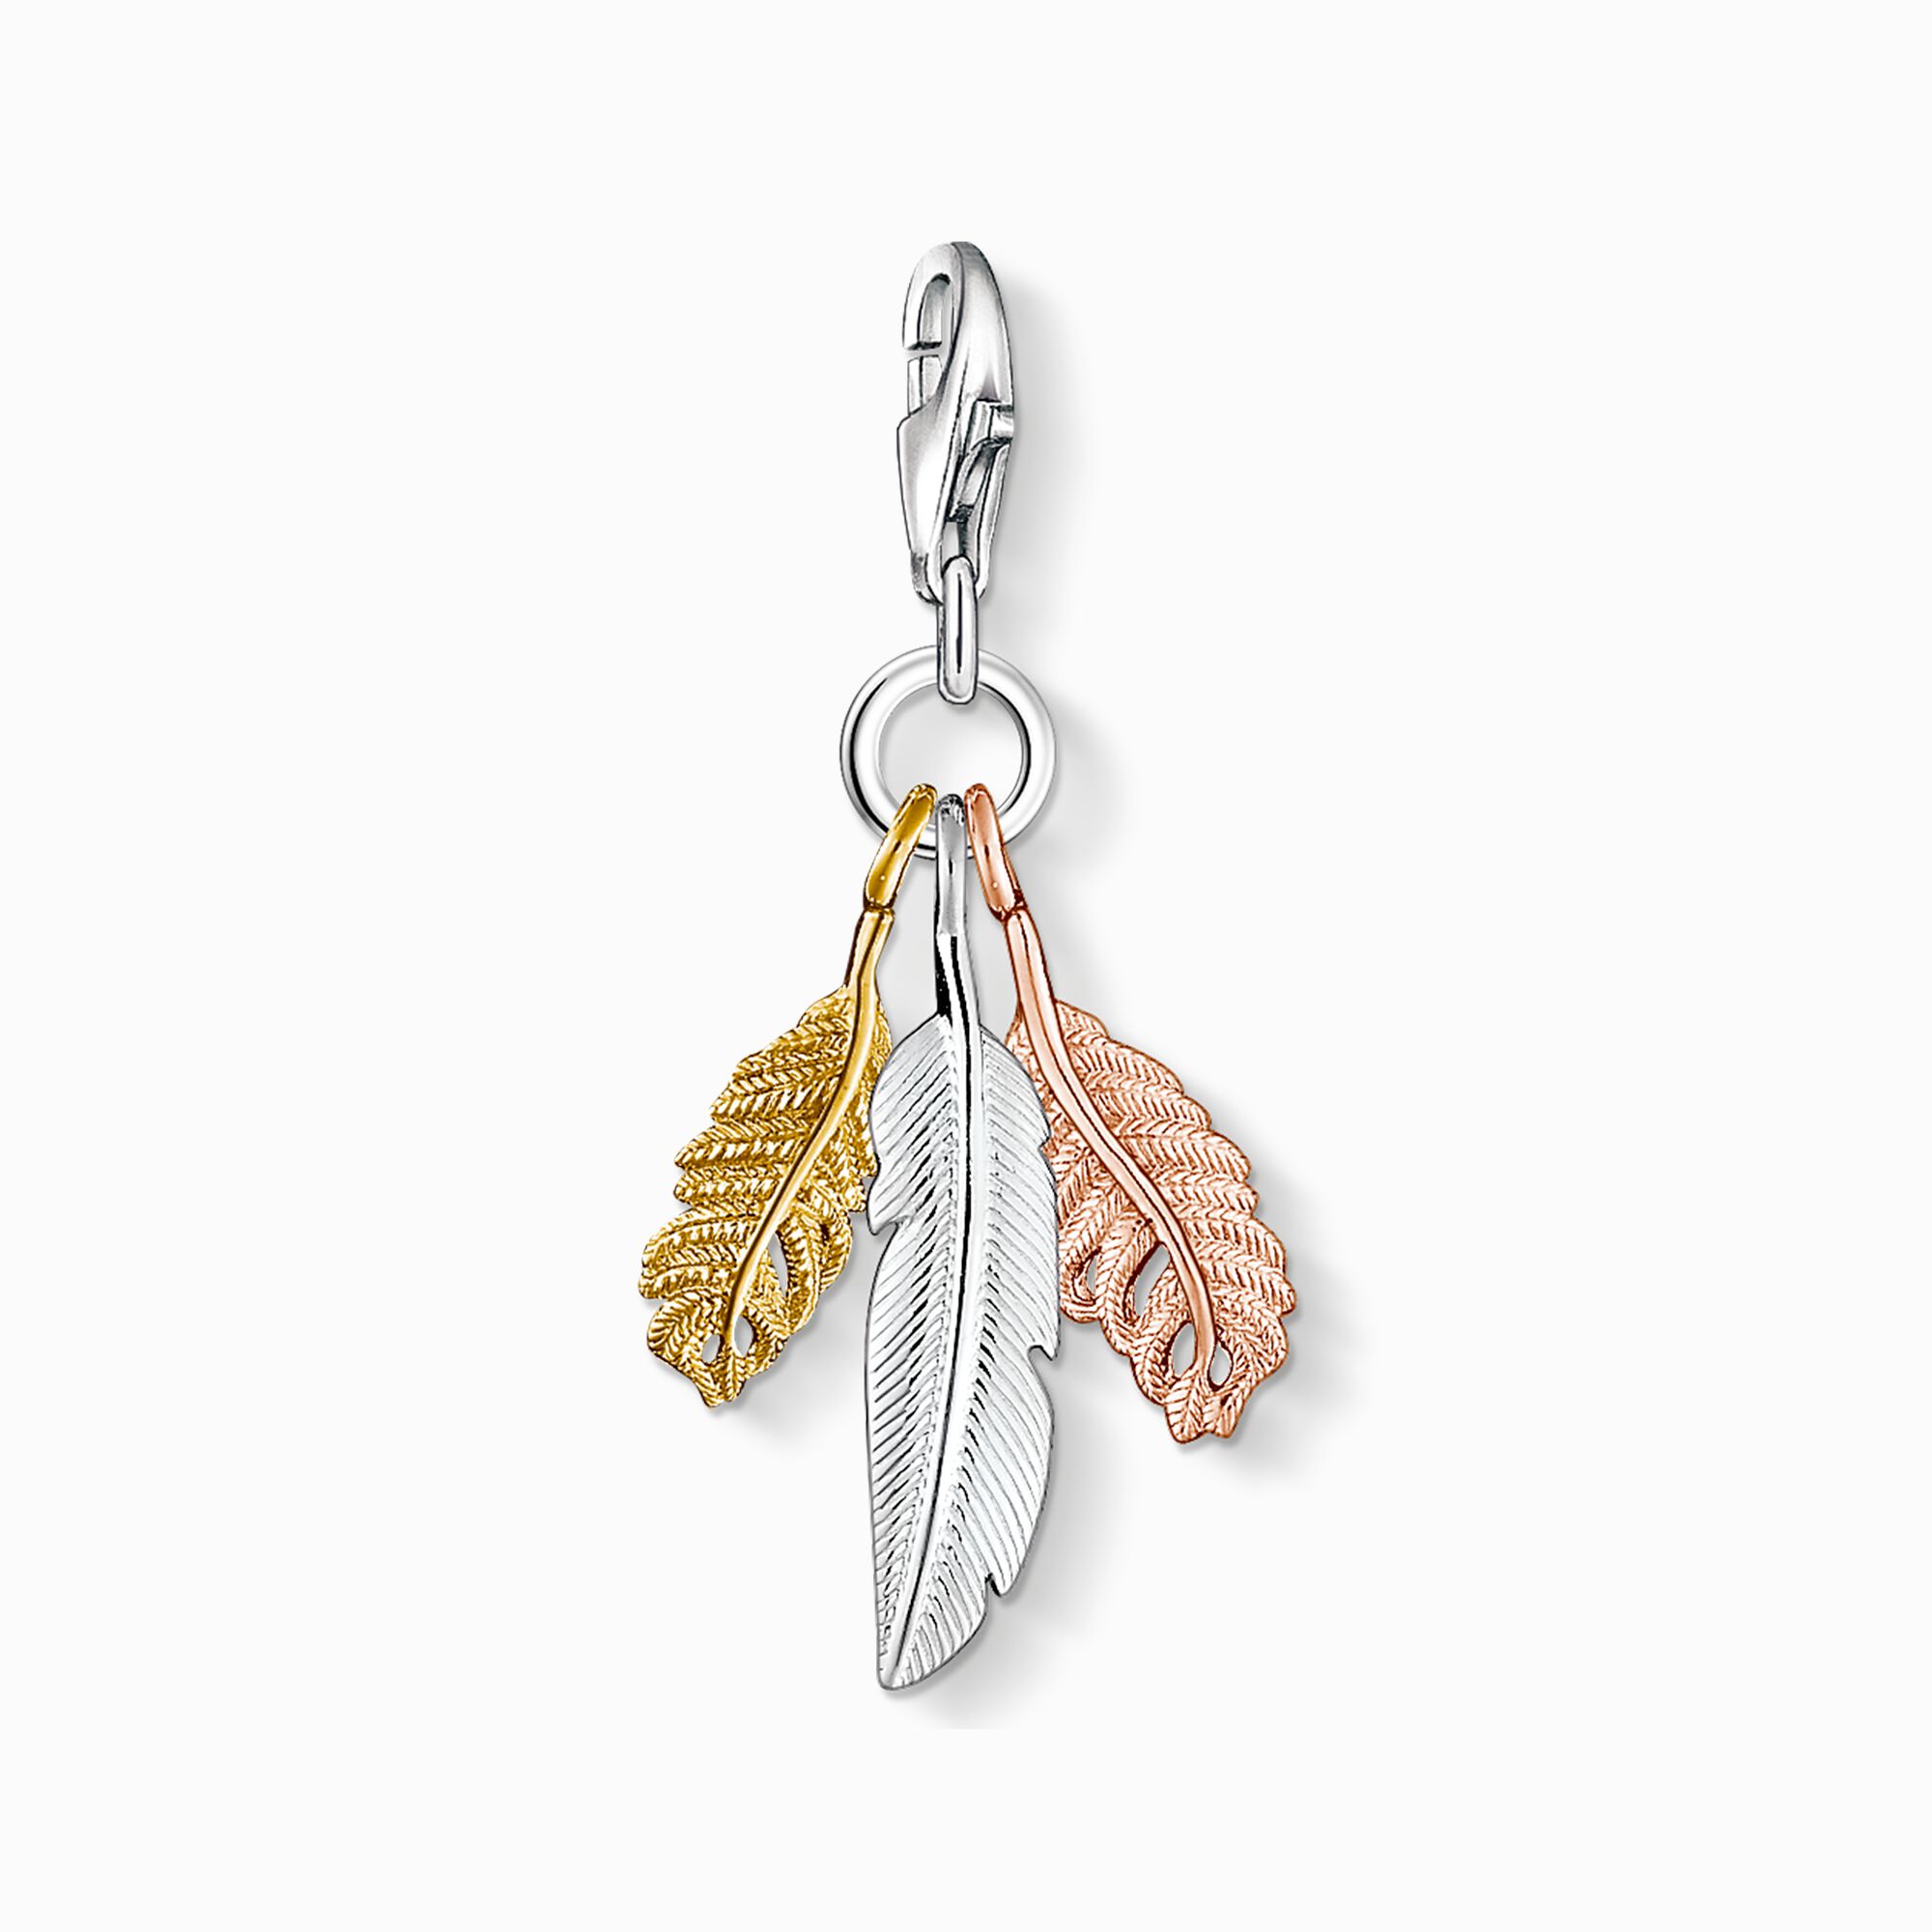 Charm pendant feathers from the Charm Club collection in the THOMAS SABO online store